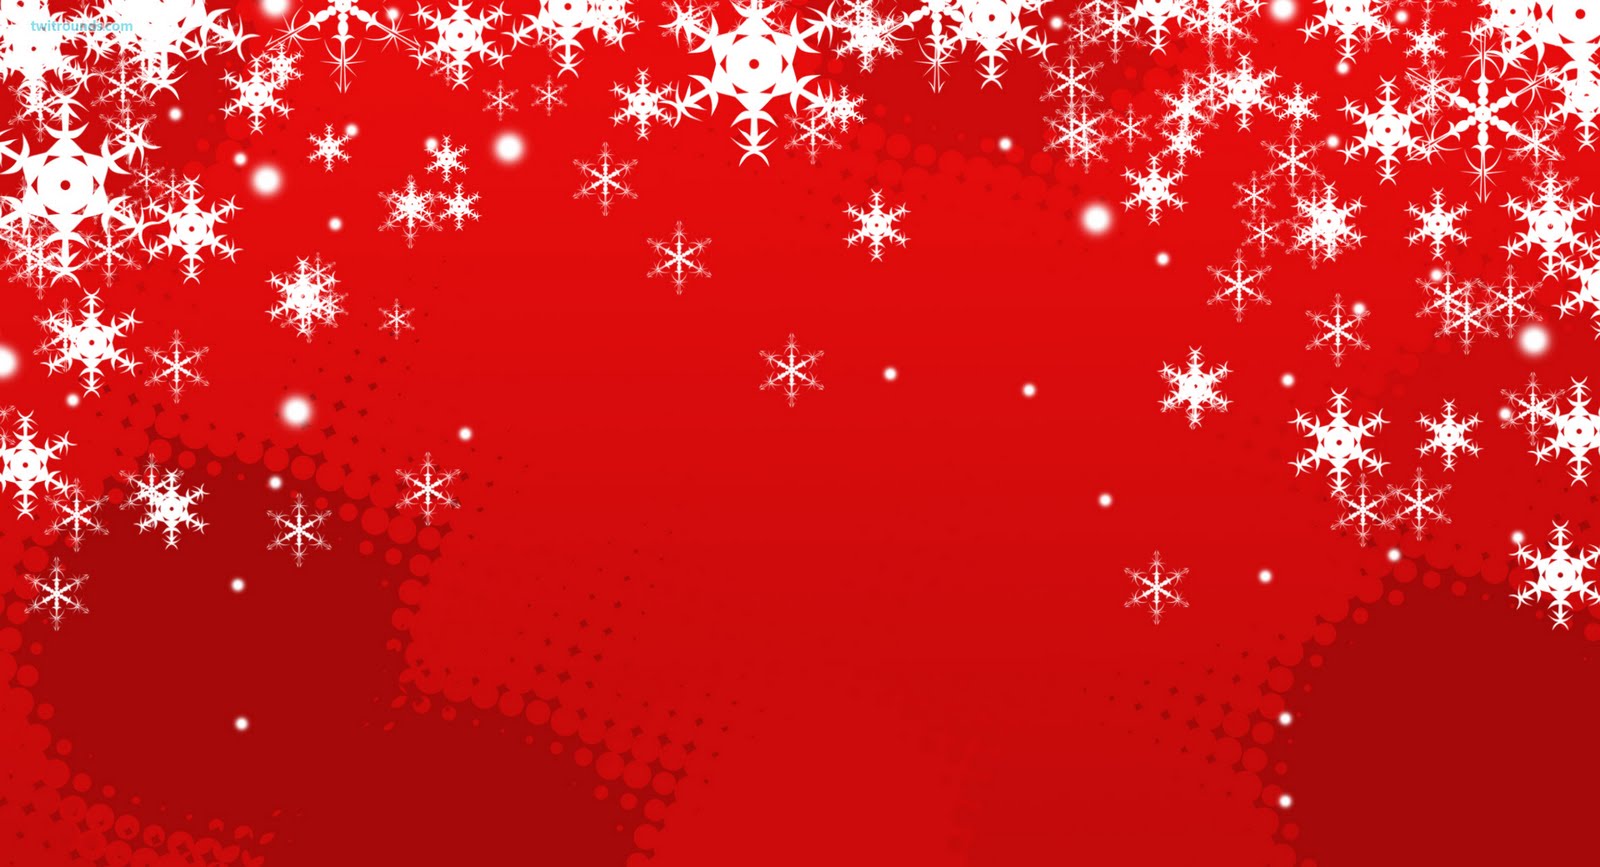 Christmas Snowflakes Clipart Image And Desktop Background Wallpaper